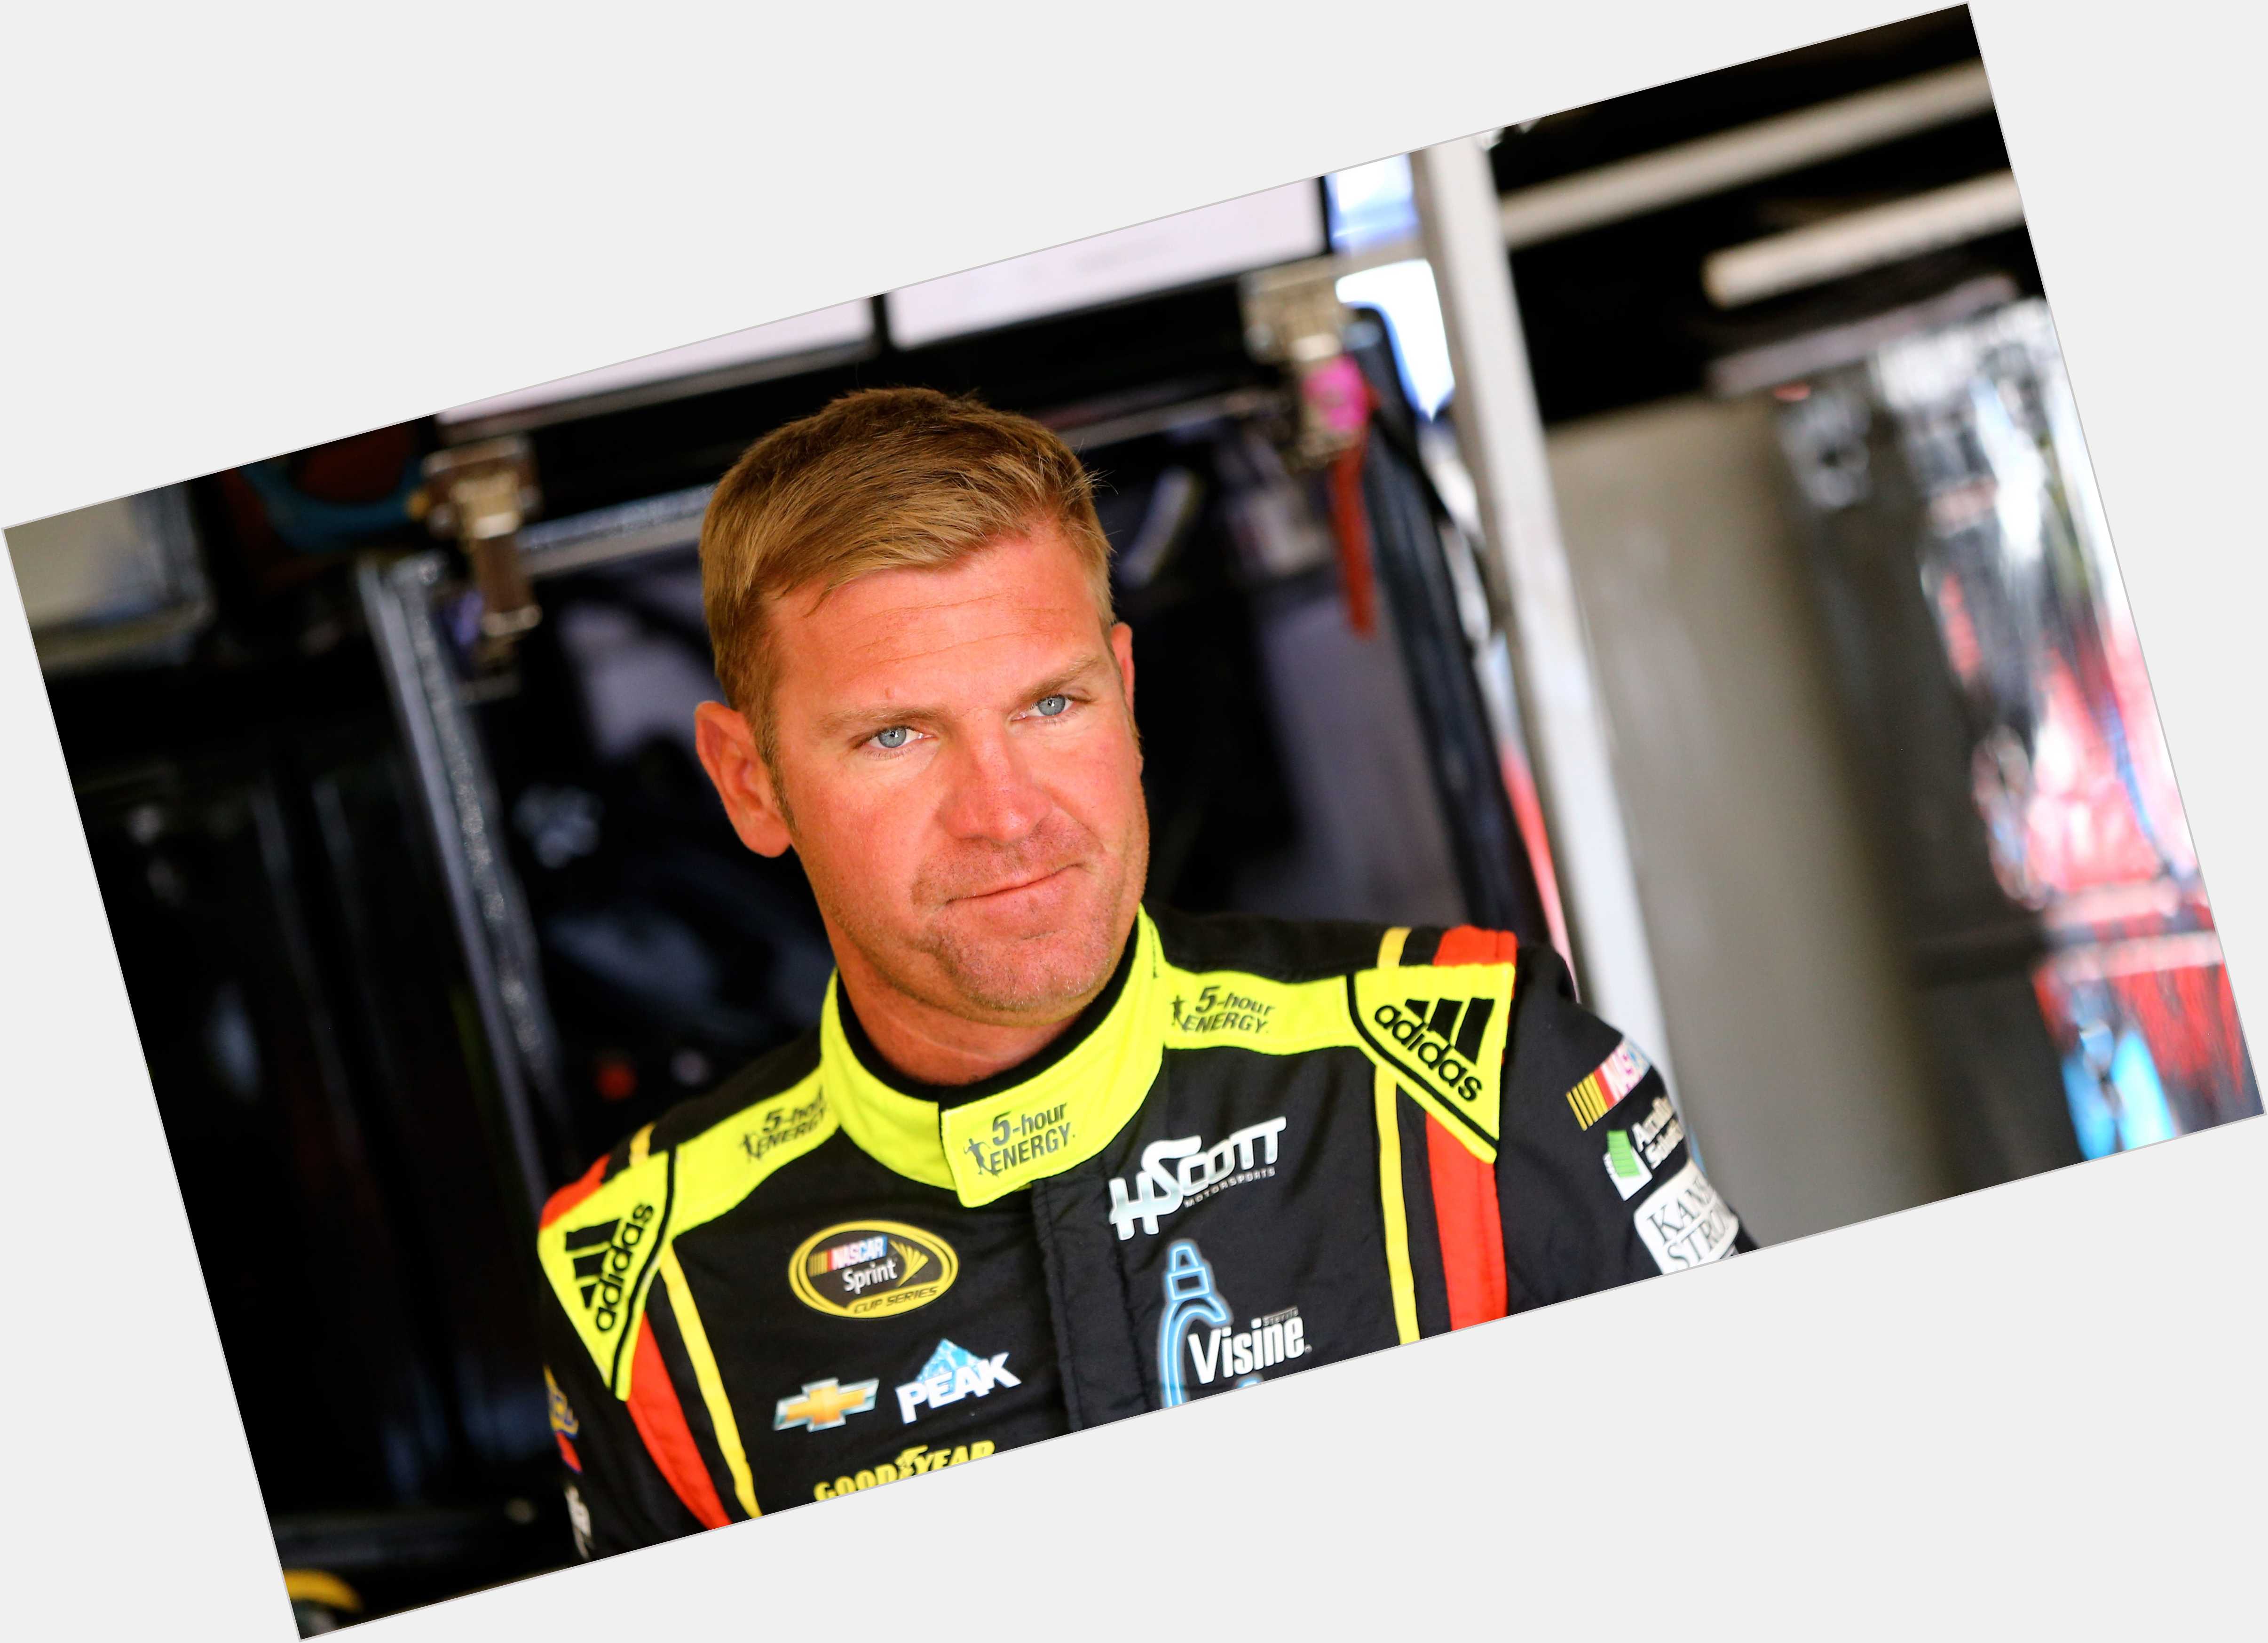 <a href="/hot-men/clint-bowyer/is-he-chase-trouble-still-married-engaged-leaving">Clint Bowyer</a> Athletic body,  light brown hair & hairstyles